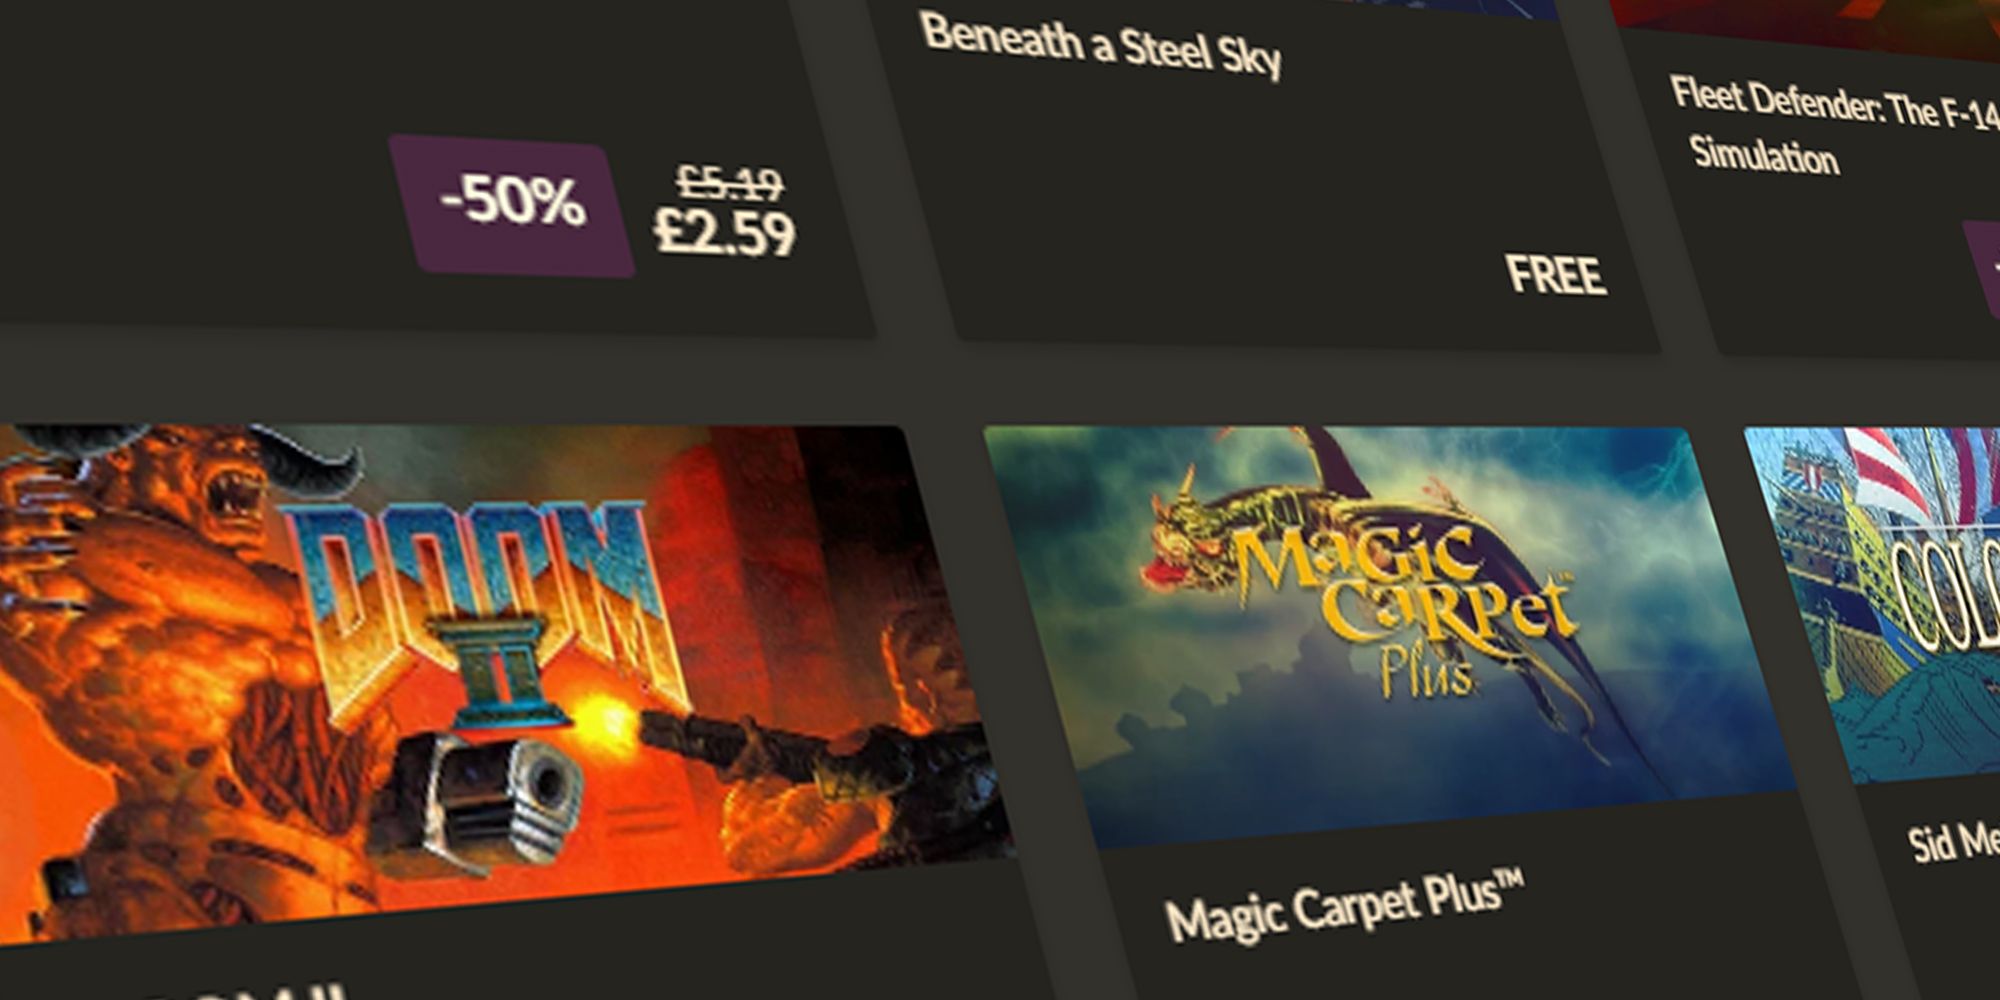 GOG Storefront showing Doom 2 and Magic Carpet Plus on sale underneath Beneath a Steel Sky